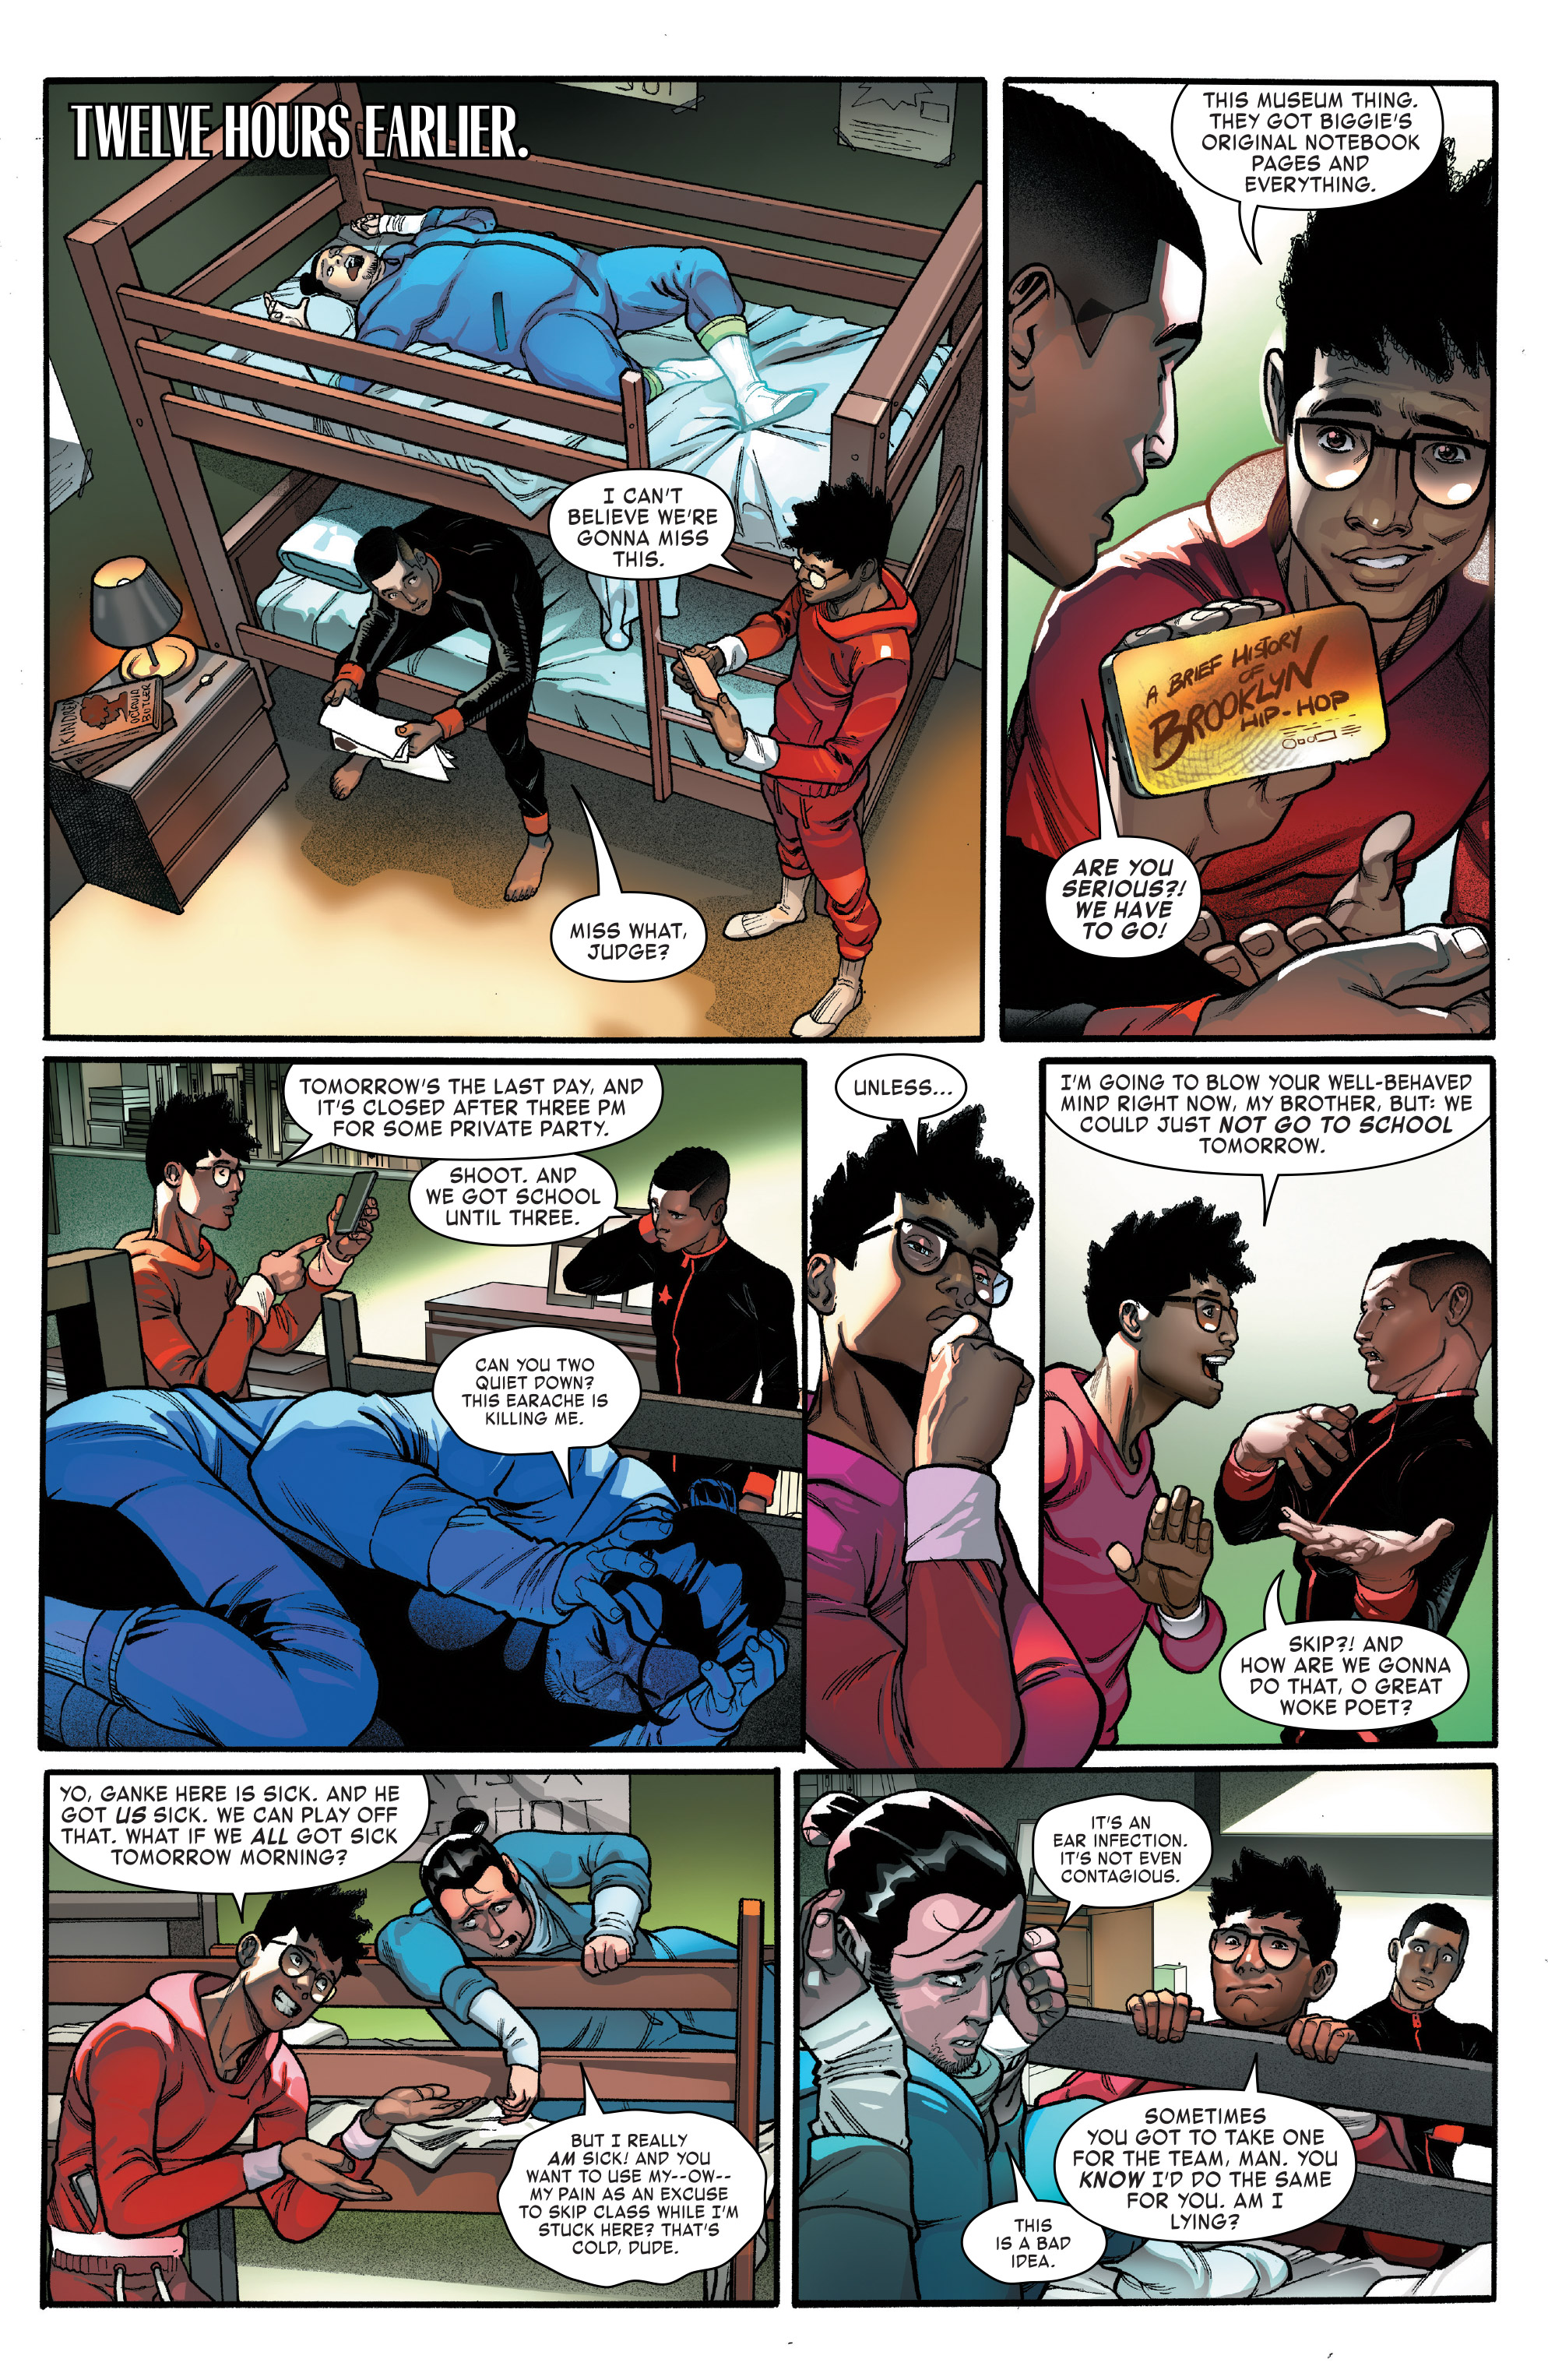 Miles Morales: Spider-Man (2018-): Chapter 4 - Page 4